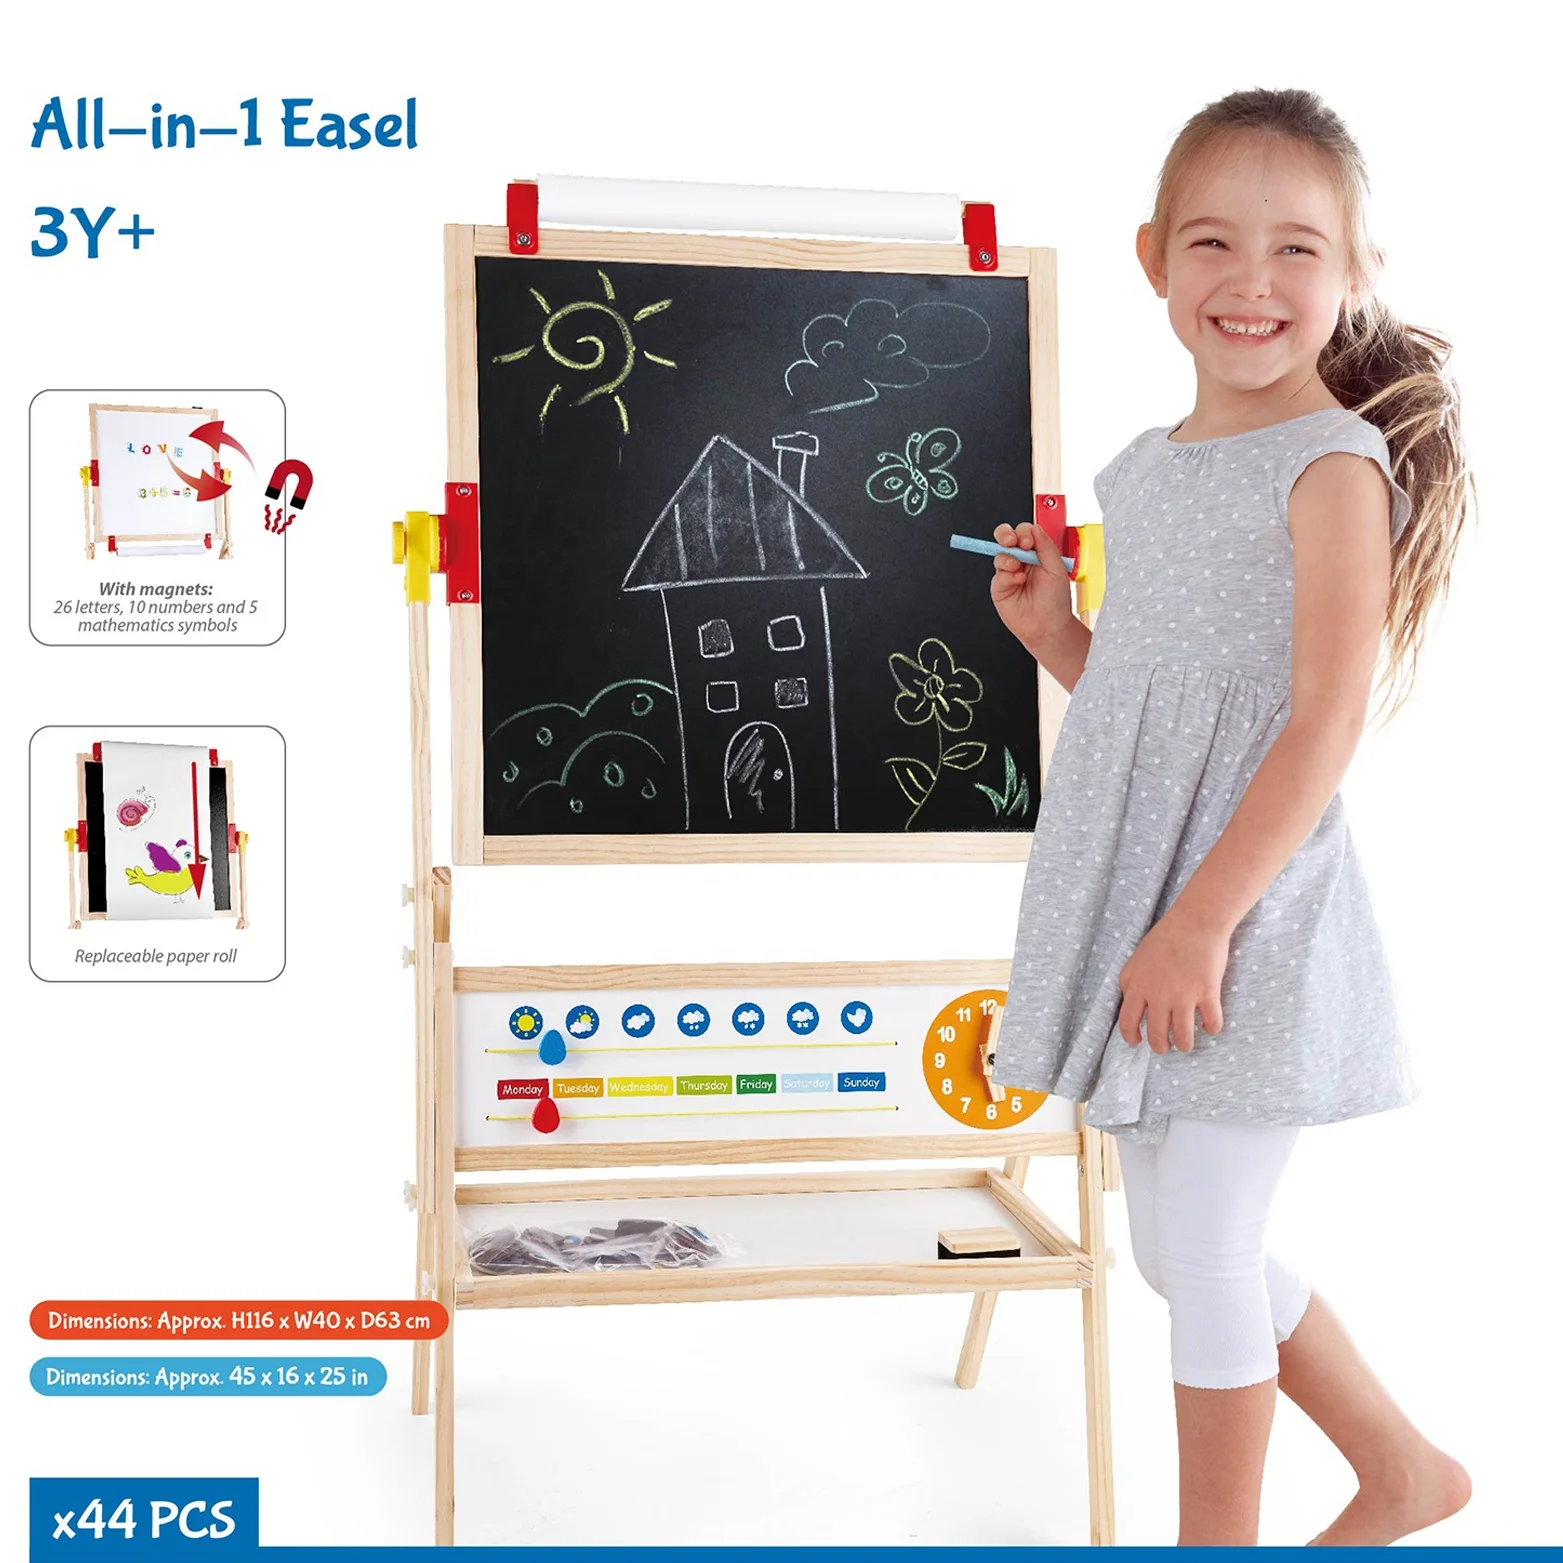 Hape All-in-One Double-Sided Art Easel w/ Paper Roll & Accessories